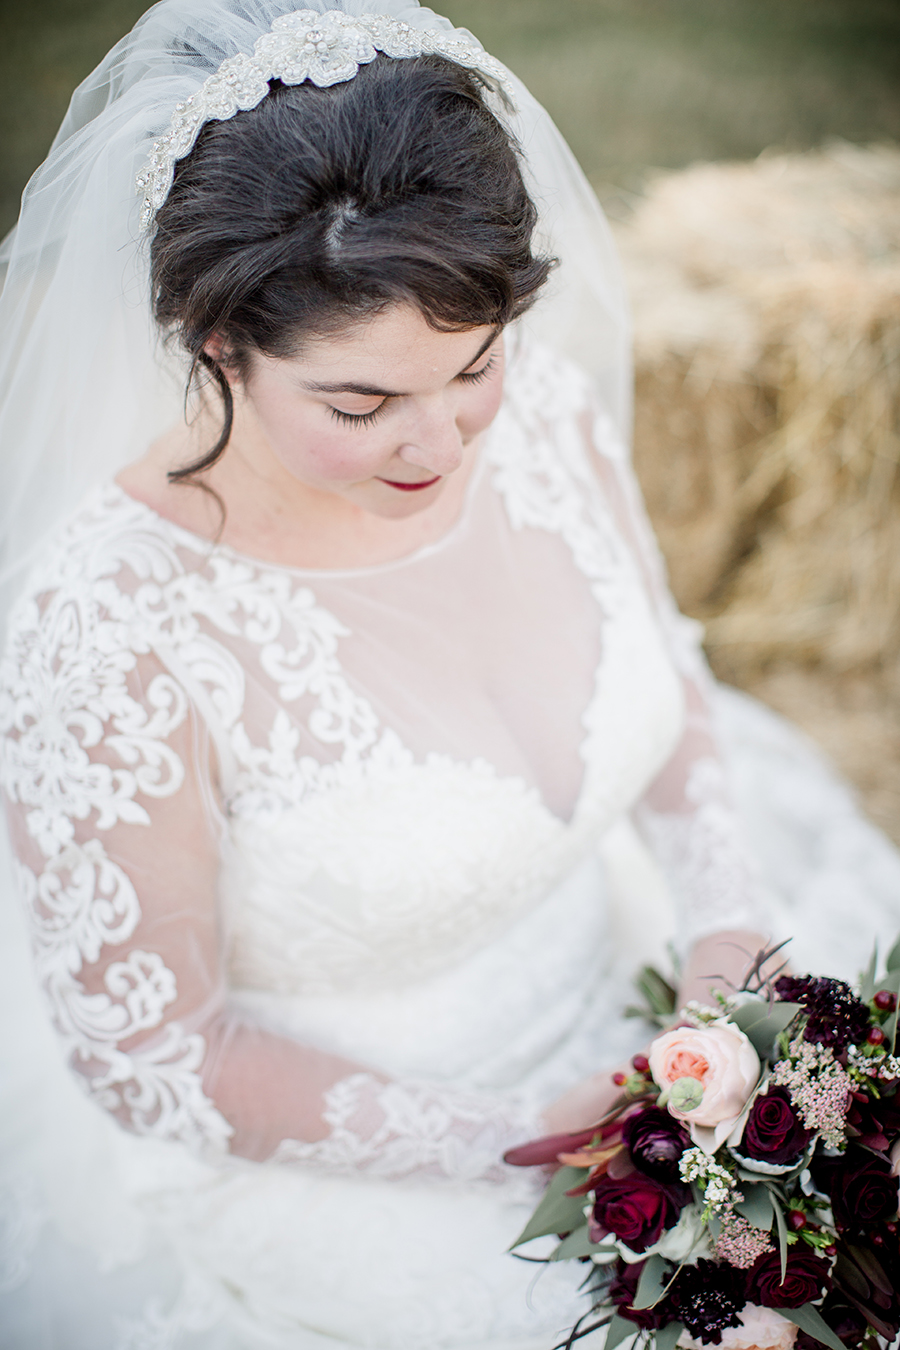 Looking down at her flowers while sitting on hay bales at this bridal session at The Barn at High Point Farms by Knoxville Wedding Photographer, Amanda May Photos.